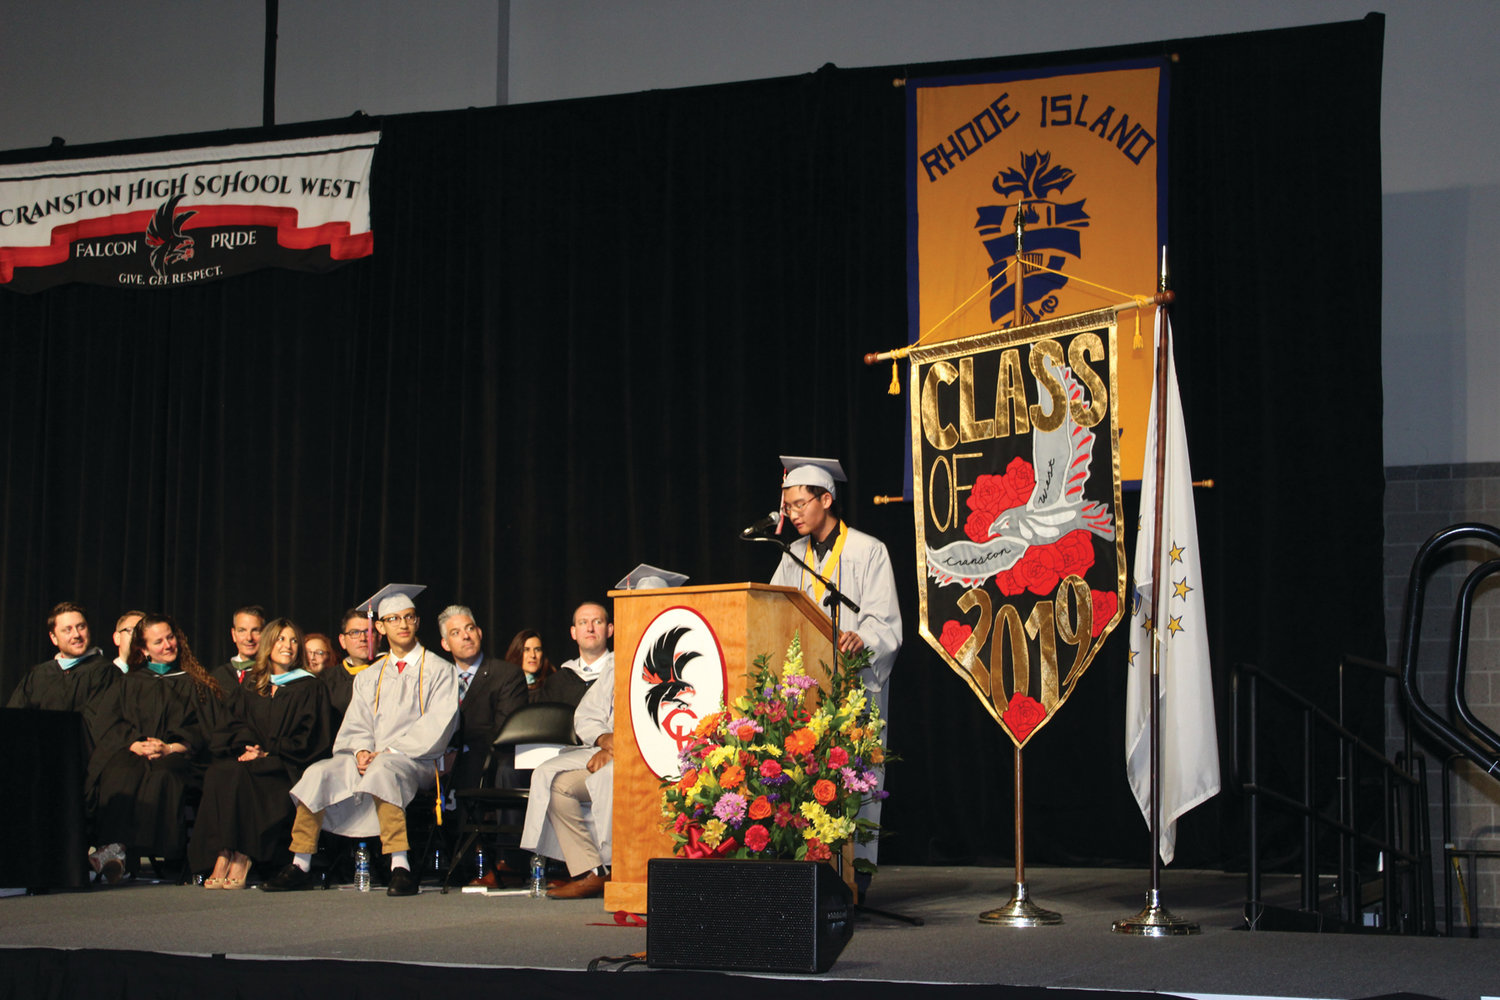 DUAL ROLES: Logan Chin had the opportunity to address the students in his role as both Student Council president and class salutatorian.